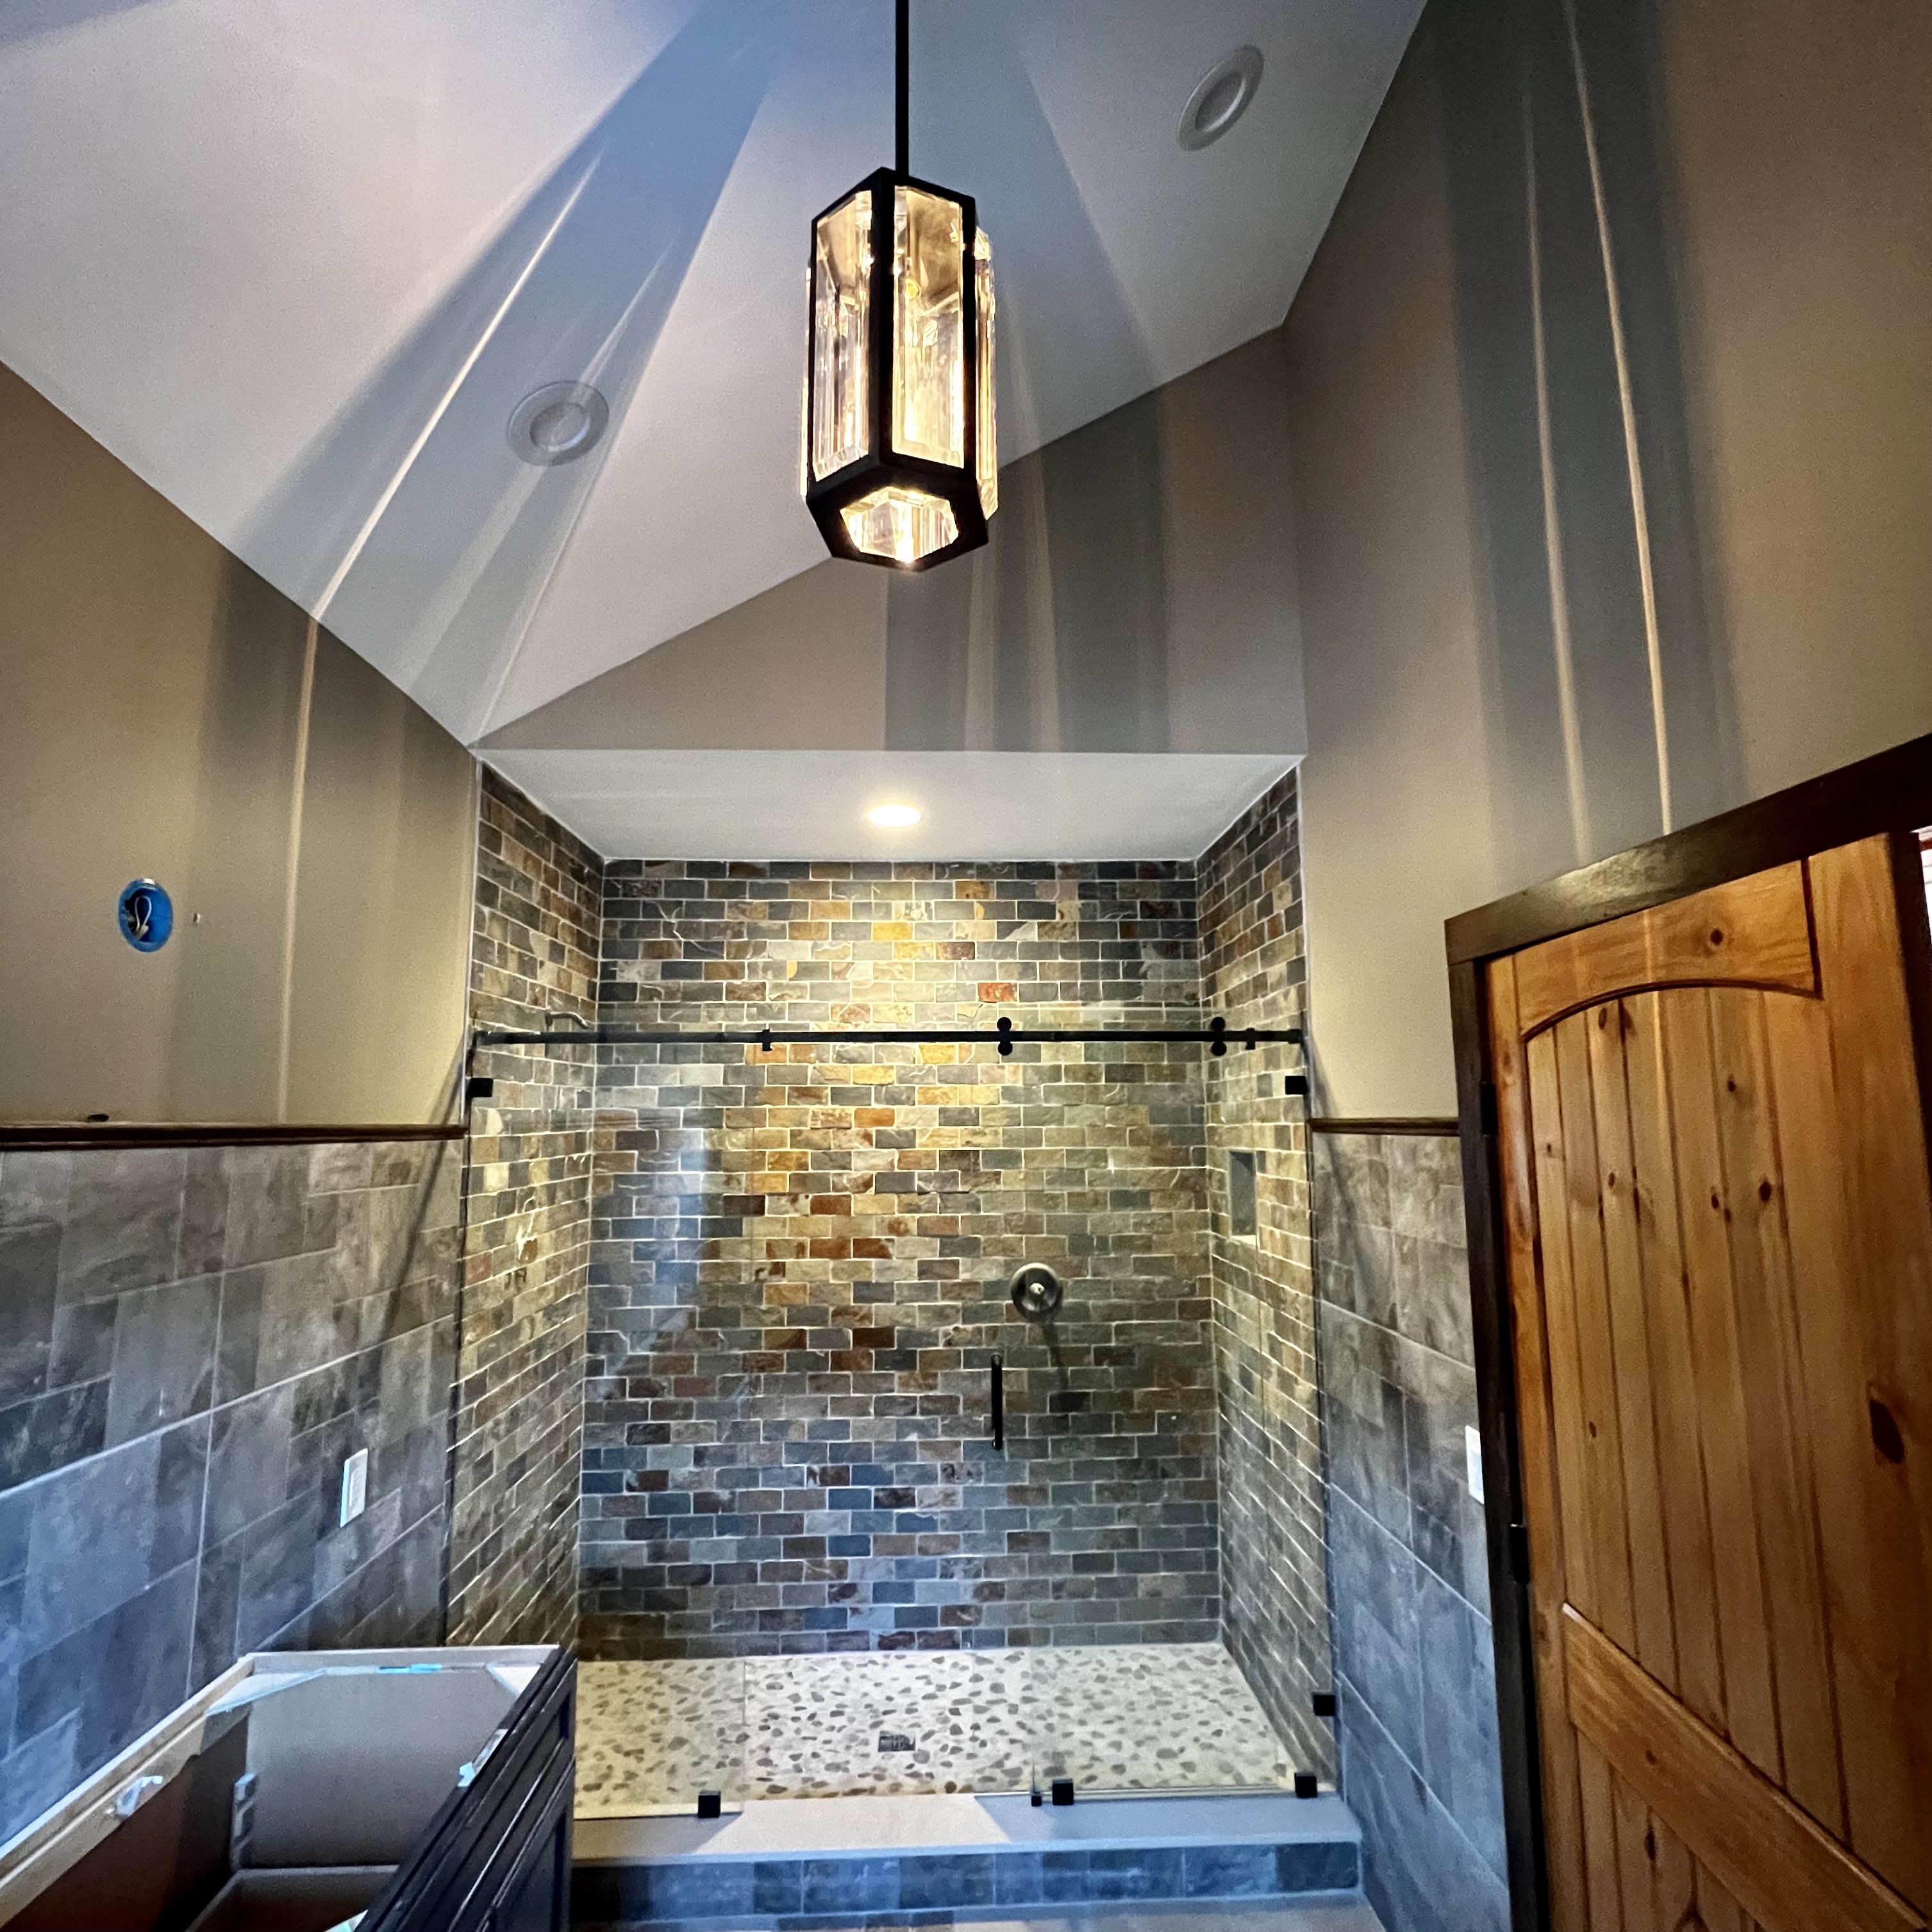 Upgraded bathroom with modern, energy-efficient lighting and electrical features